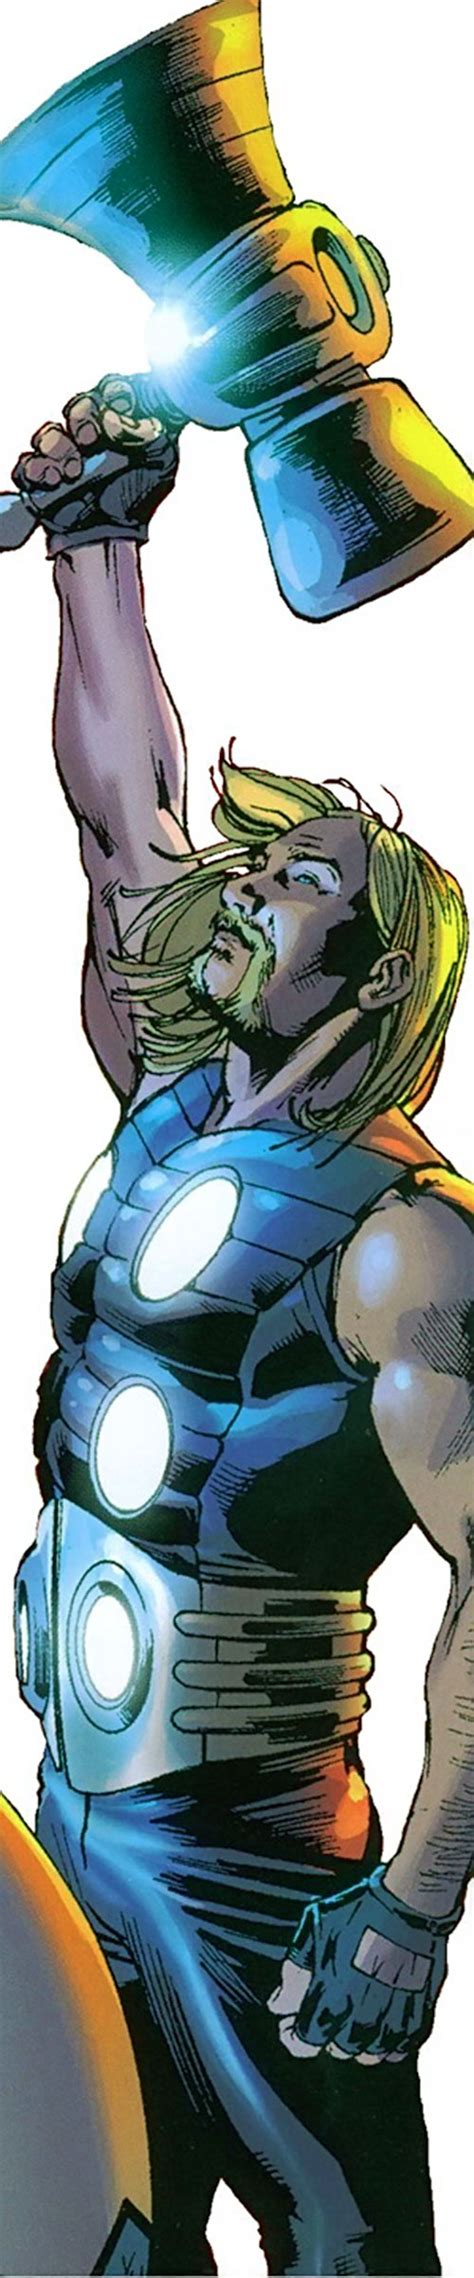 Thor Ultimate Marvel Comics Ultimates Character Profile